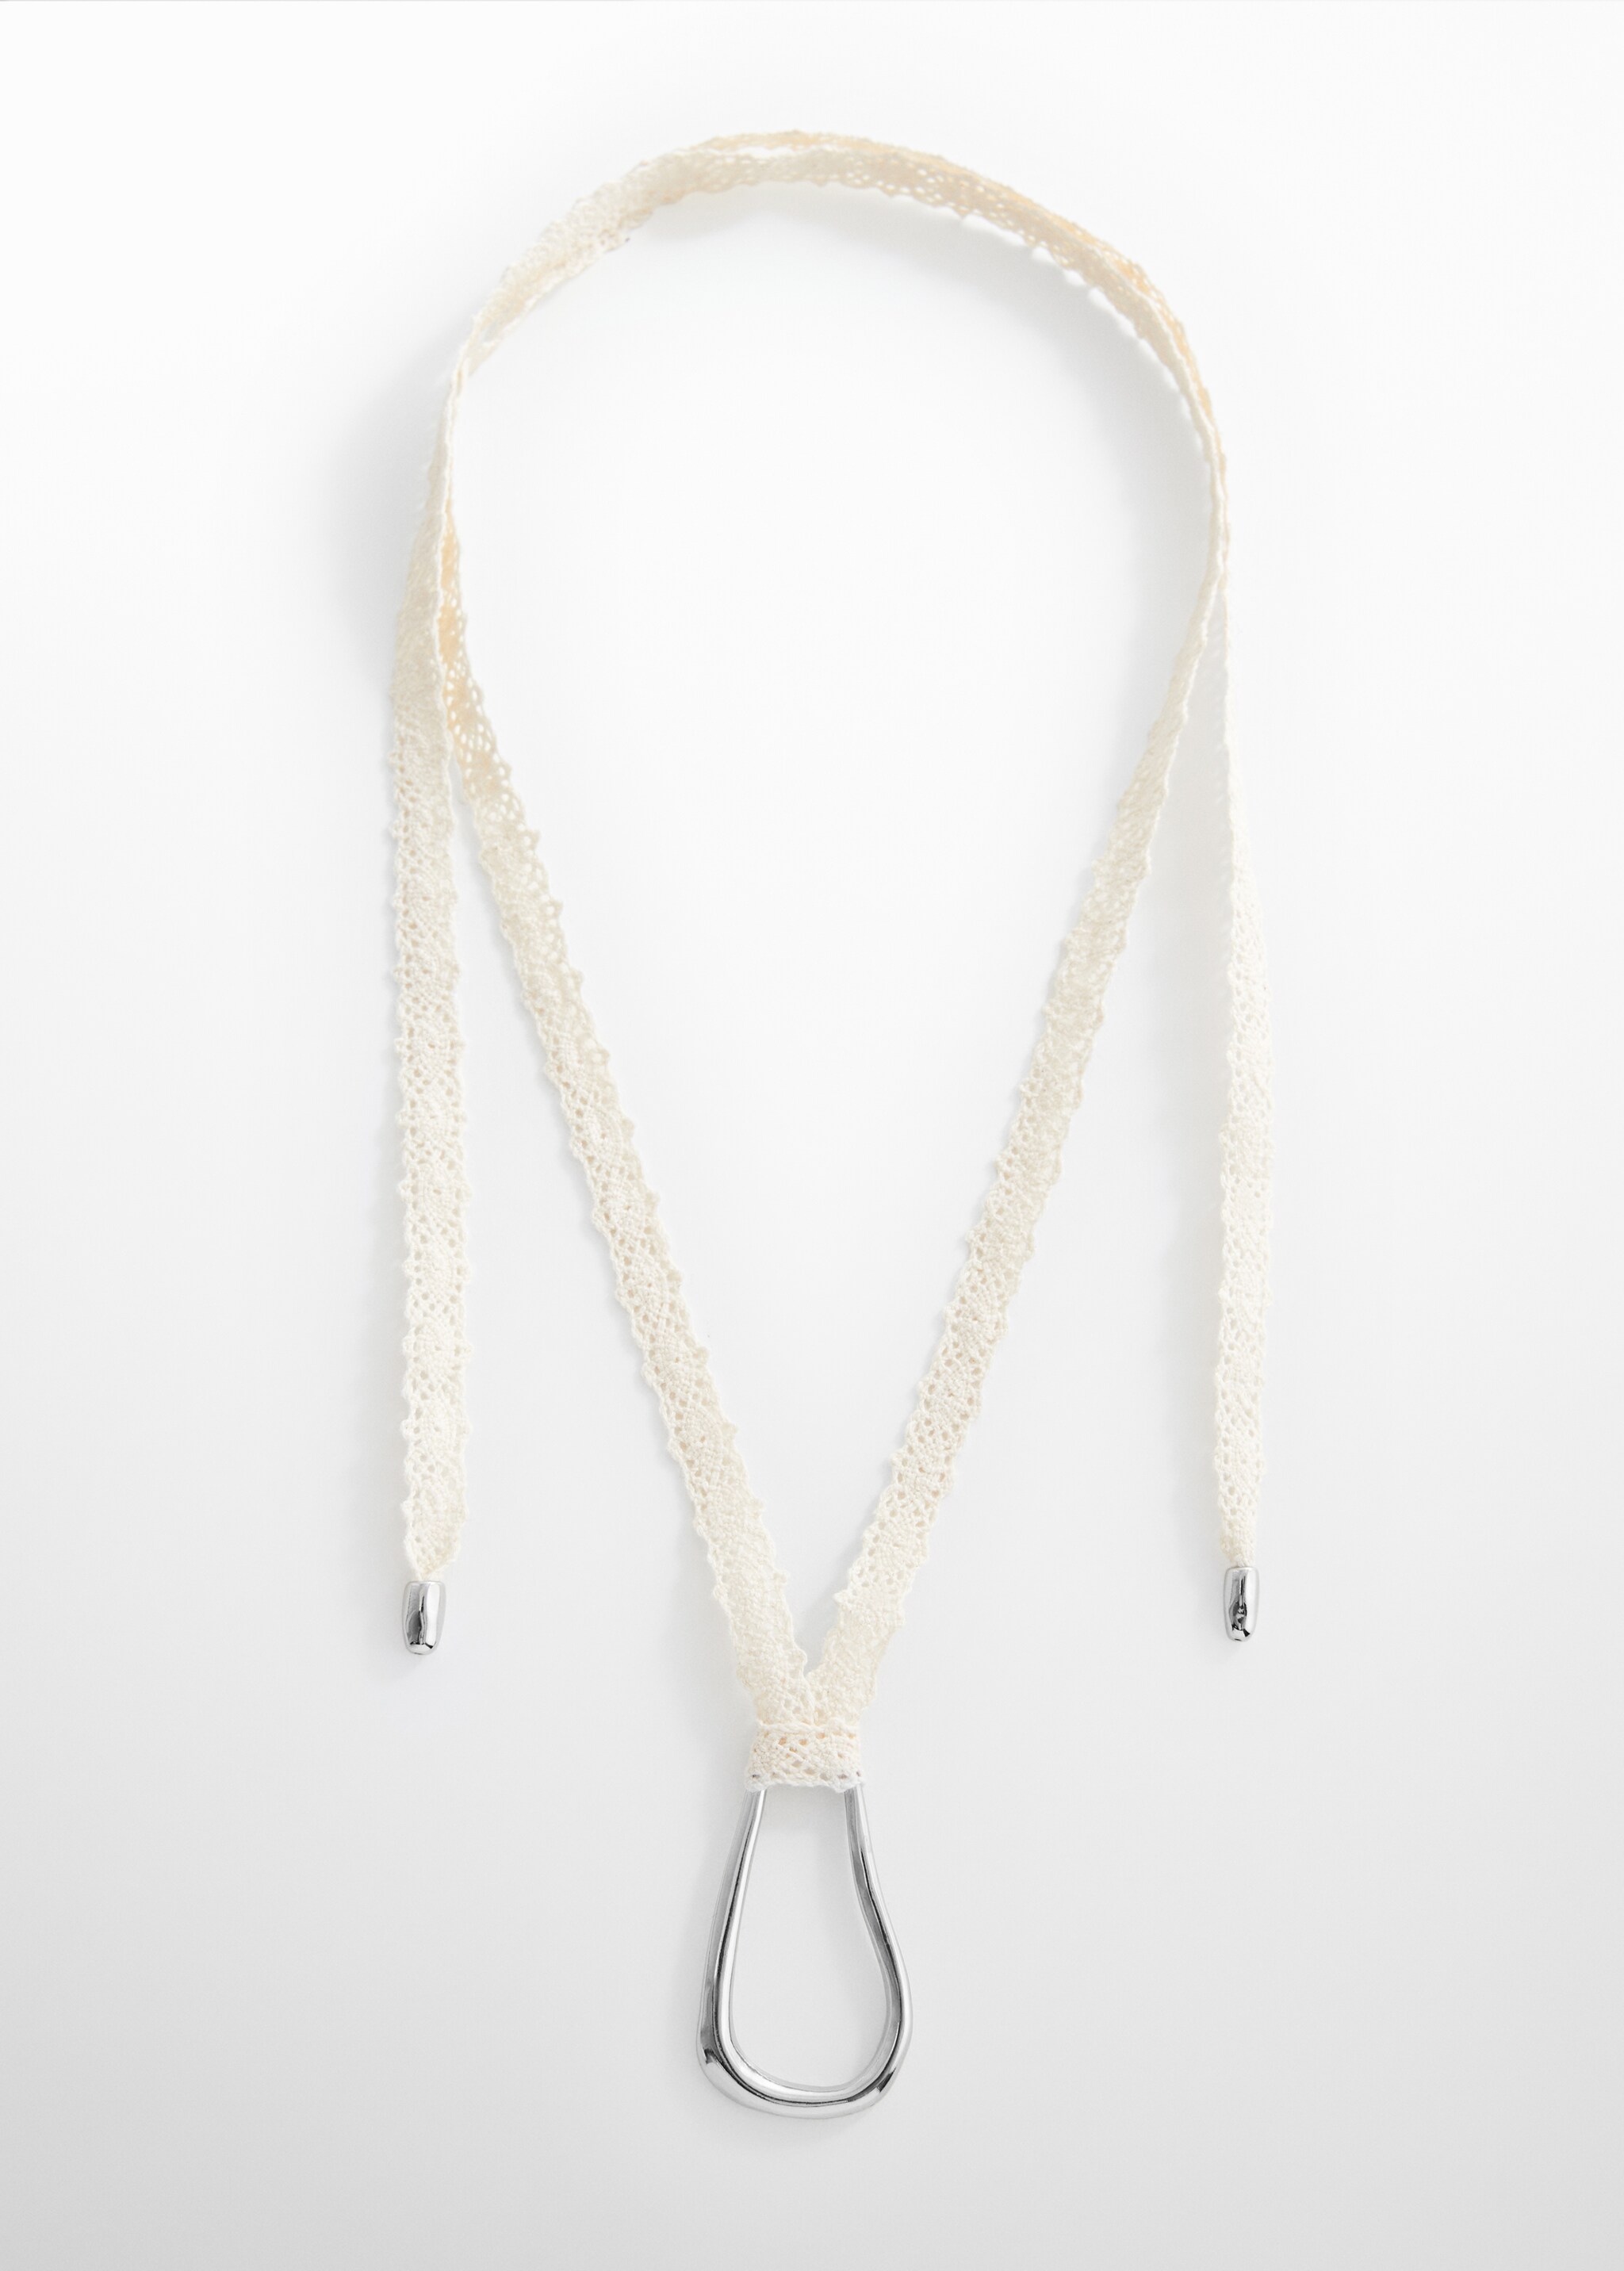 Lace ribbon pendant necklace - Article without model